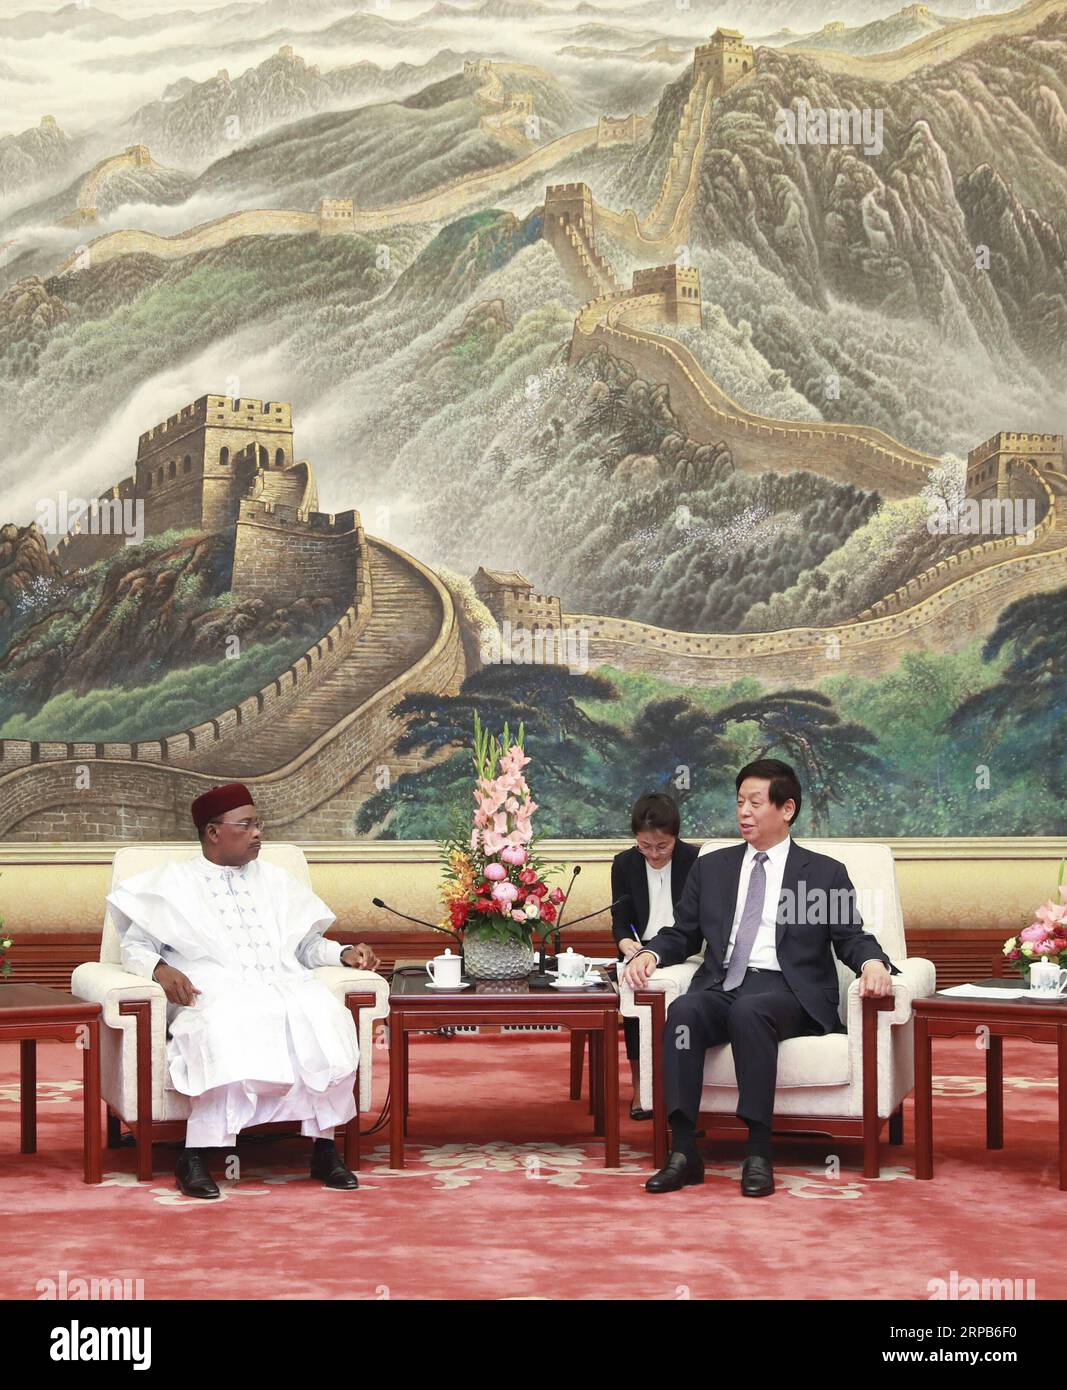 (190529) -- BEIJING, May 29, 2019 (Xinhua) -- Li Zhanshu (R), chairman of the Standing Committee of the National People s Congress (NPC), meets with Niger s President Mahamadou Issoufou at the Great Hall of the People in Beijing, capital of China, May 29, 2019. (Xinhua/Pang Xinglei) CHINA-BEIJING-LI ZHANSHU-NIGER S PRESIDENT-MEETING (CN) PUBLICATIONxNOTxINxCHN Stock Photo